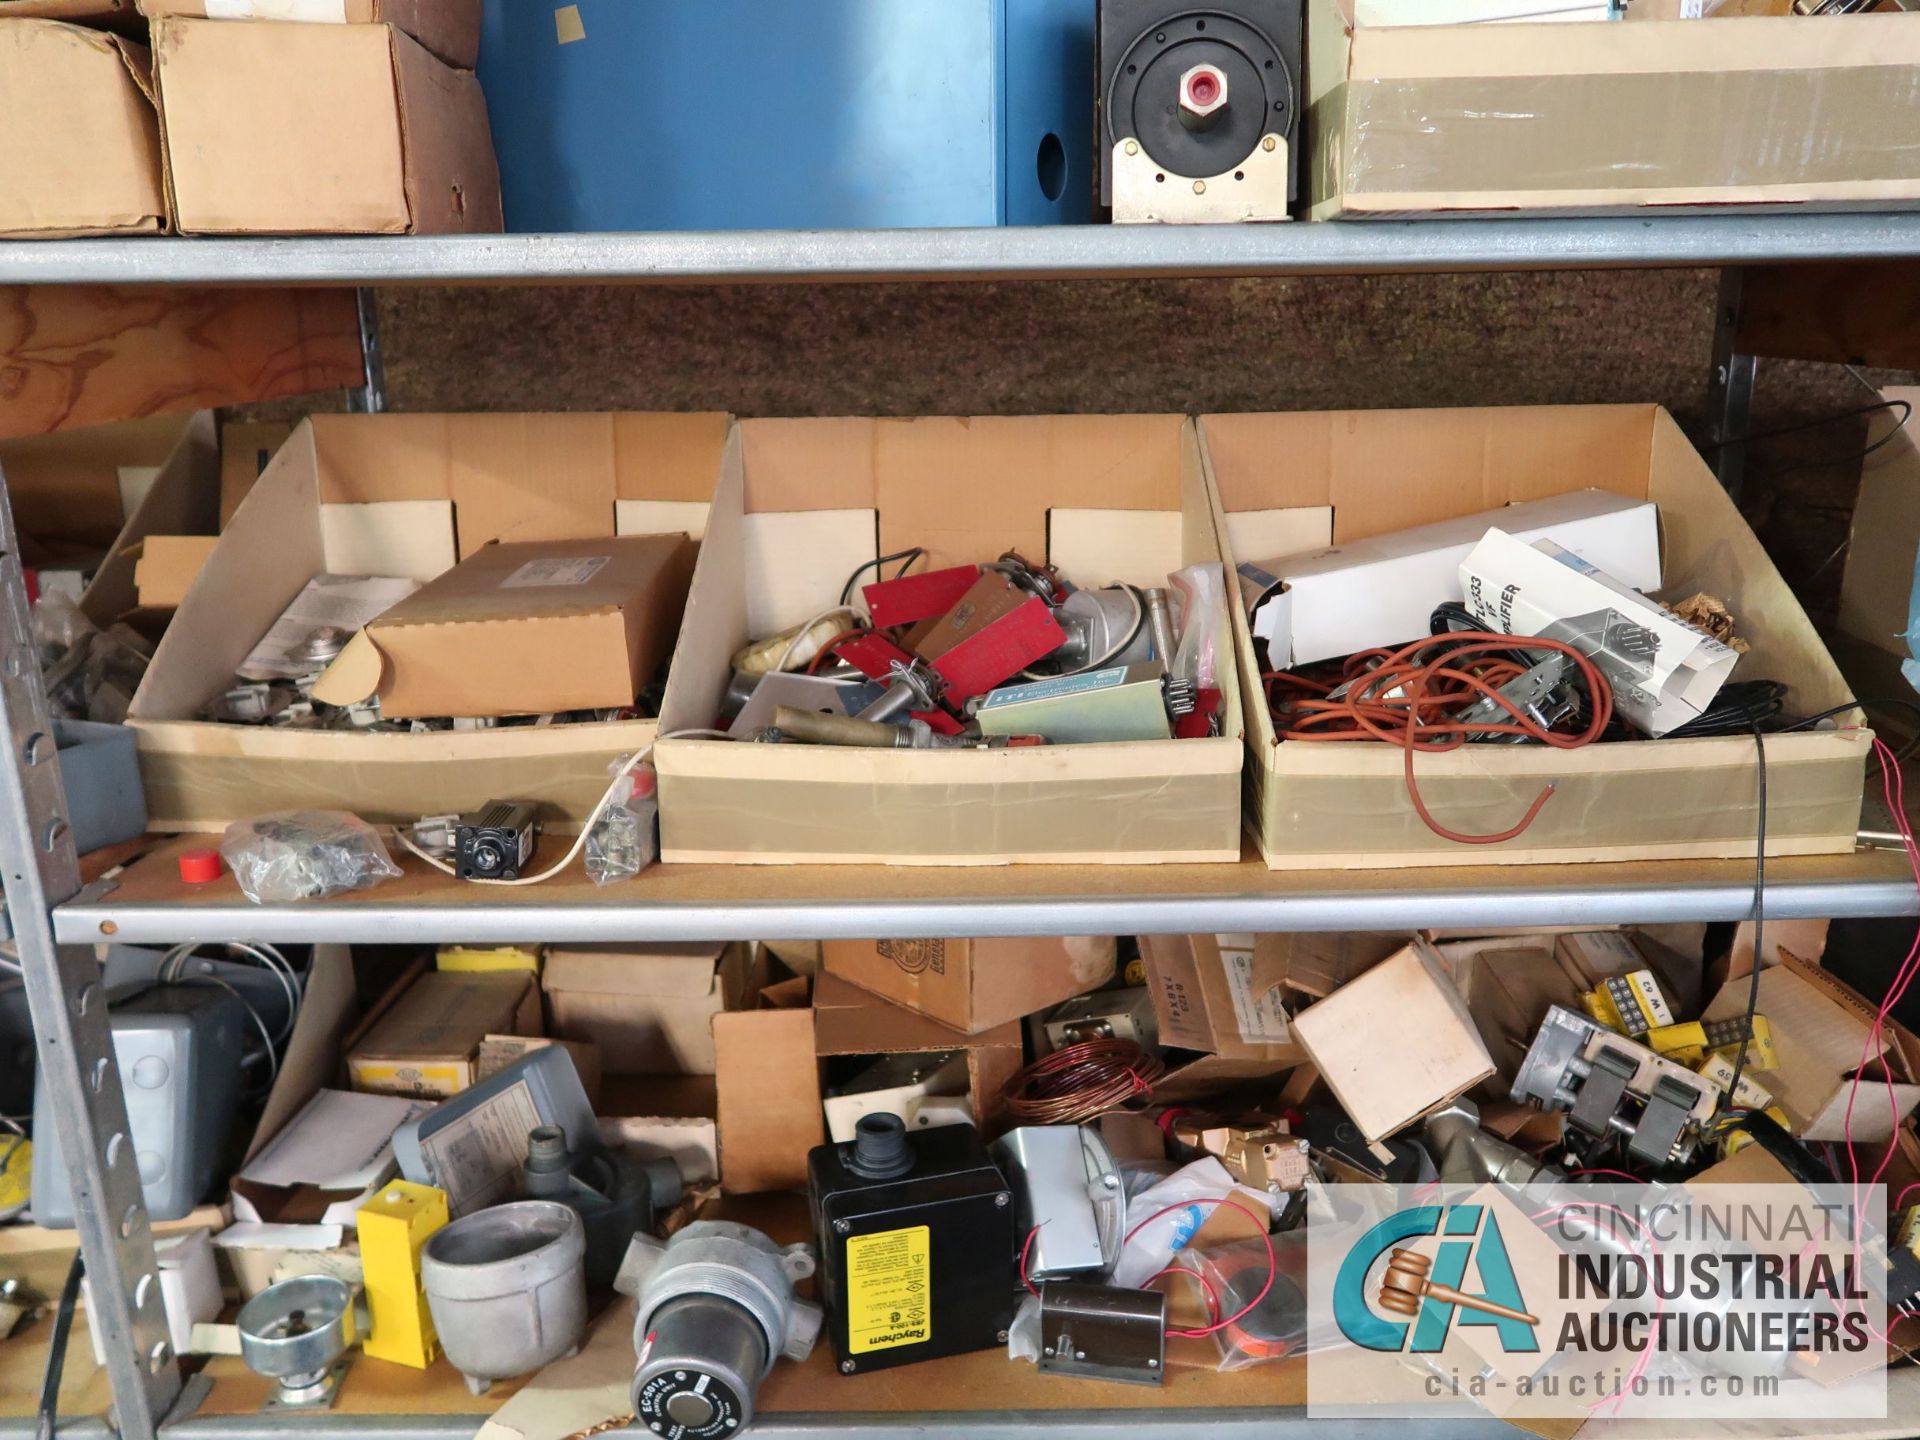 CONTENTS OF (16) SHELVES INCLUDING MISCELLANEOUS VALVES, THERMOSTATS, ANALYZERS, ELECTRICAL, CONTROL - Image 27 of 47